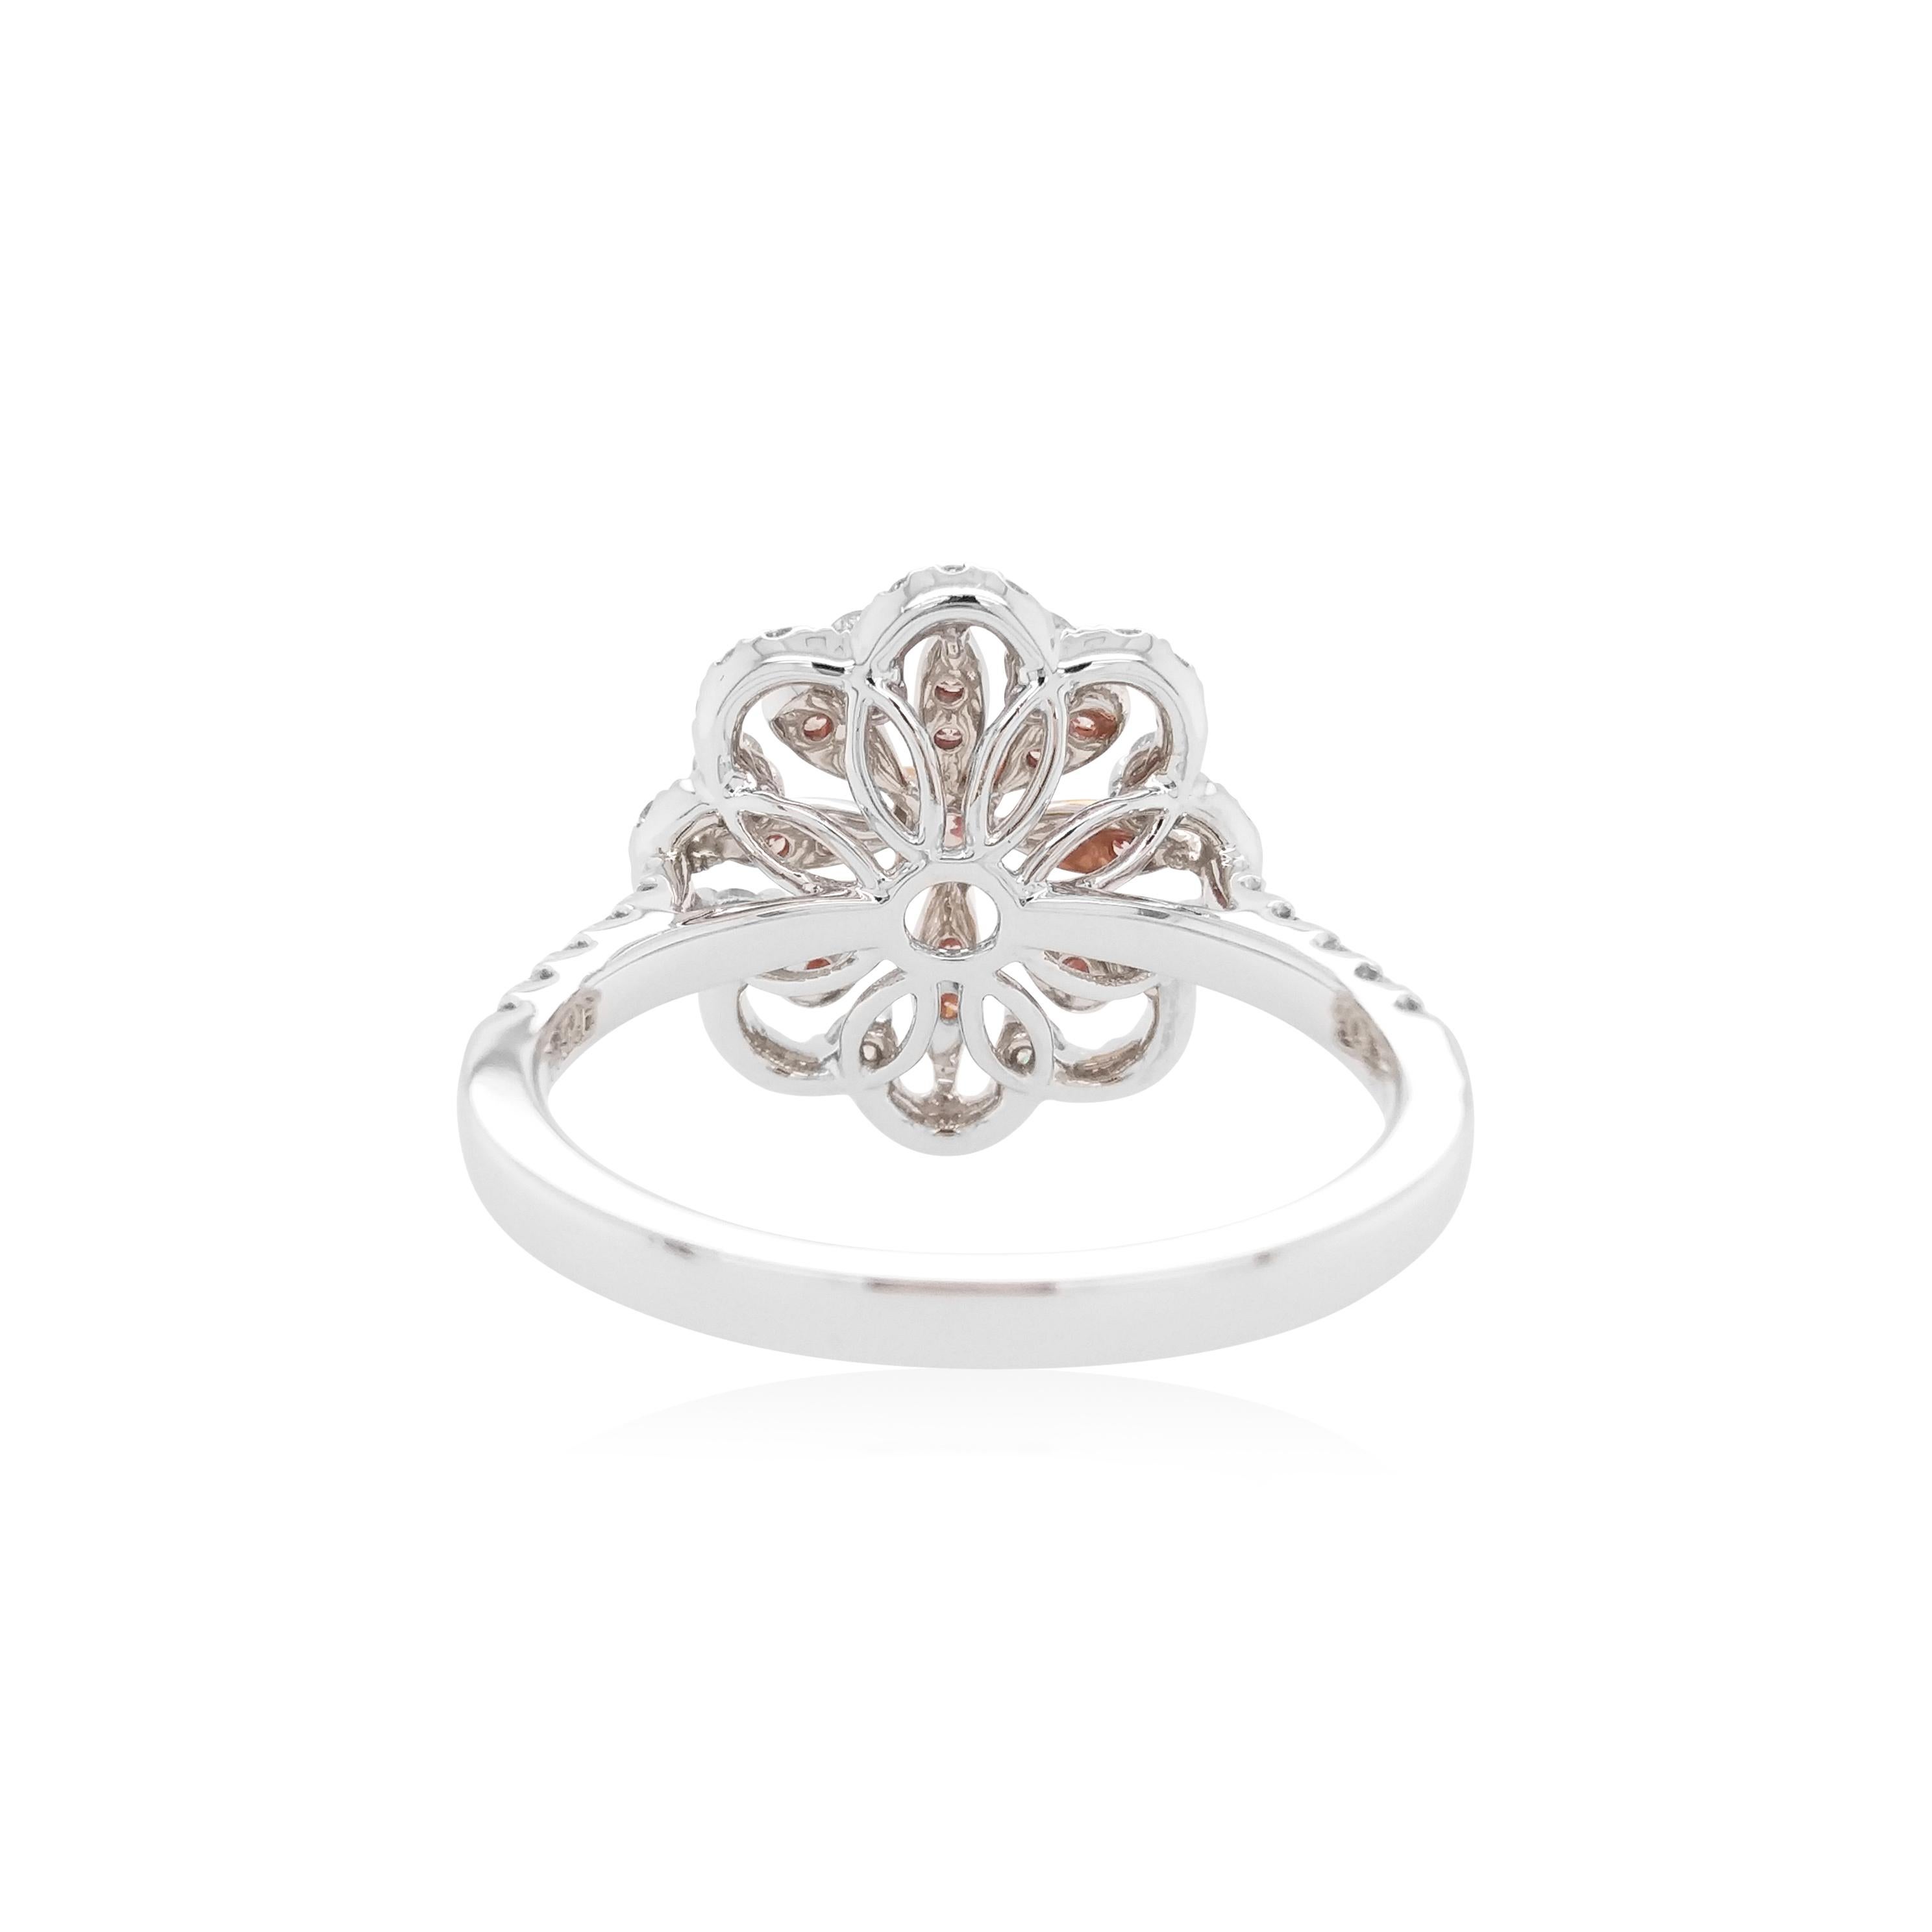 This unique flower shaped ring features natural Argyle pink diamonds at the heart of the design. The rich colour of these diamonds is complimented perfectly by the delicate platinum floral design which completed by a combination of round